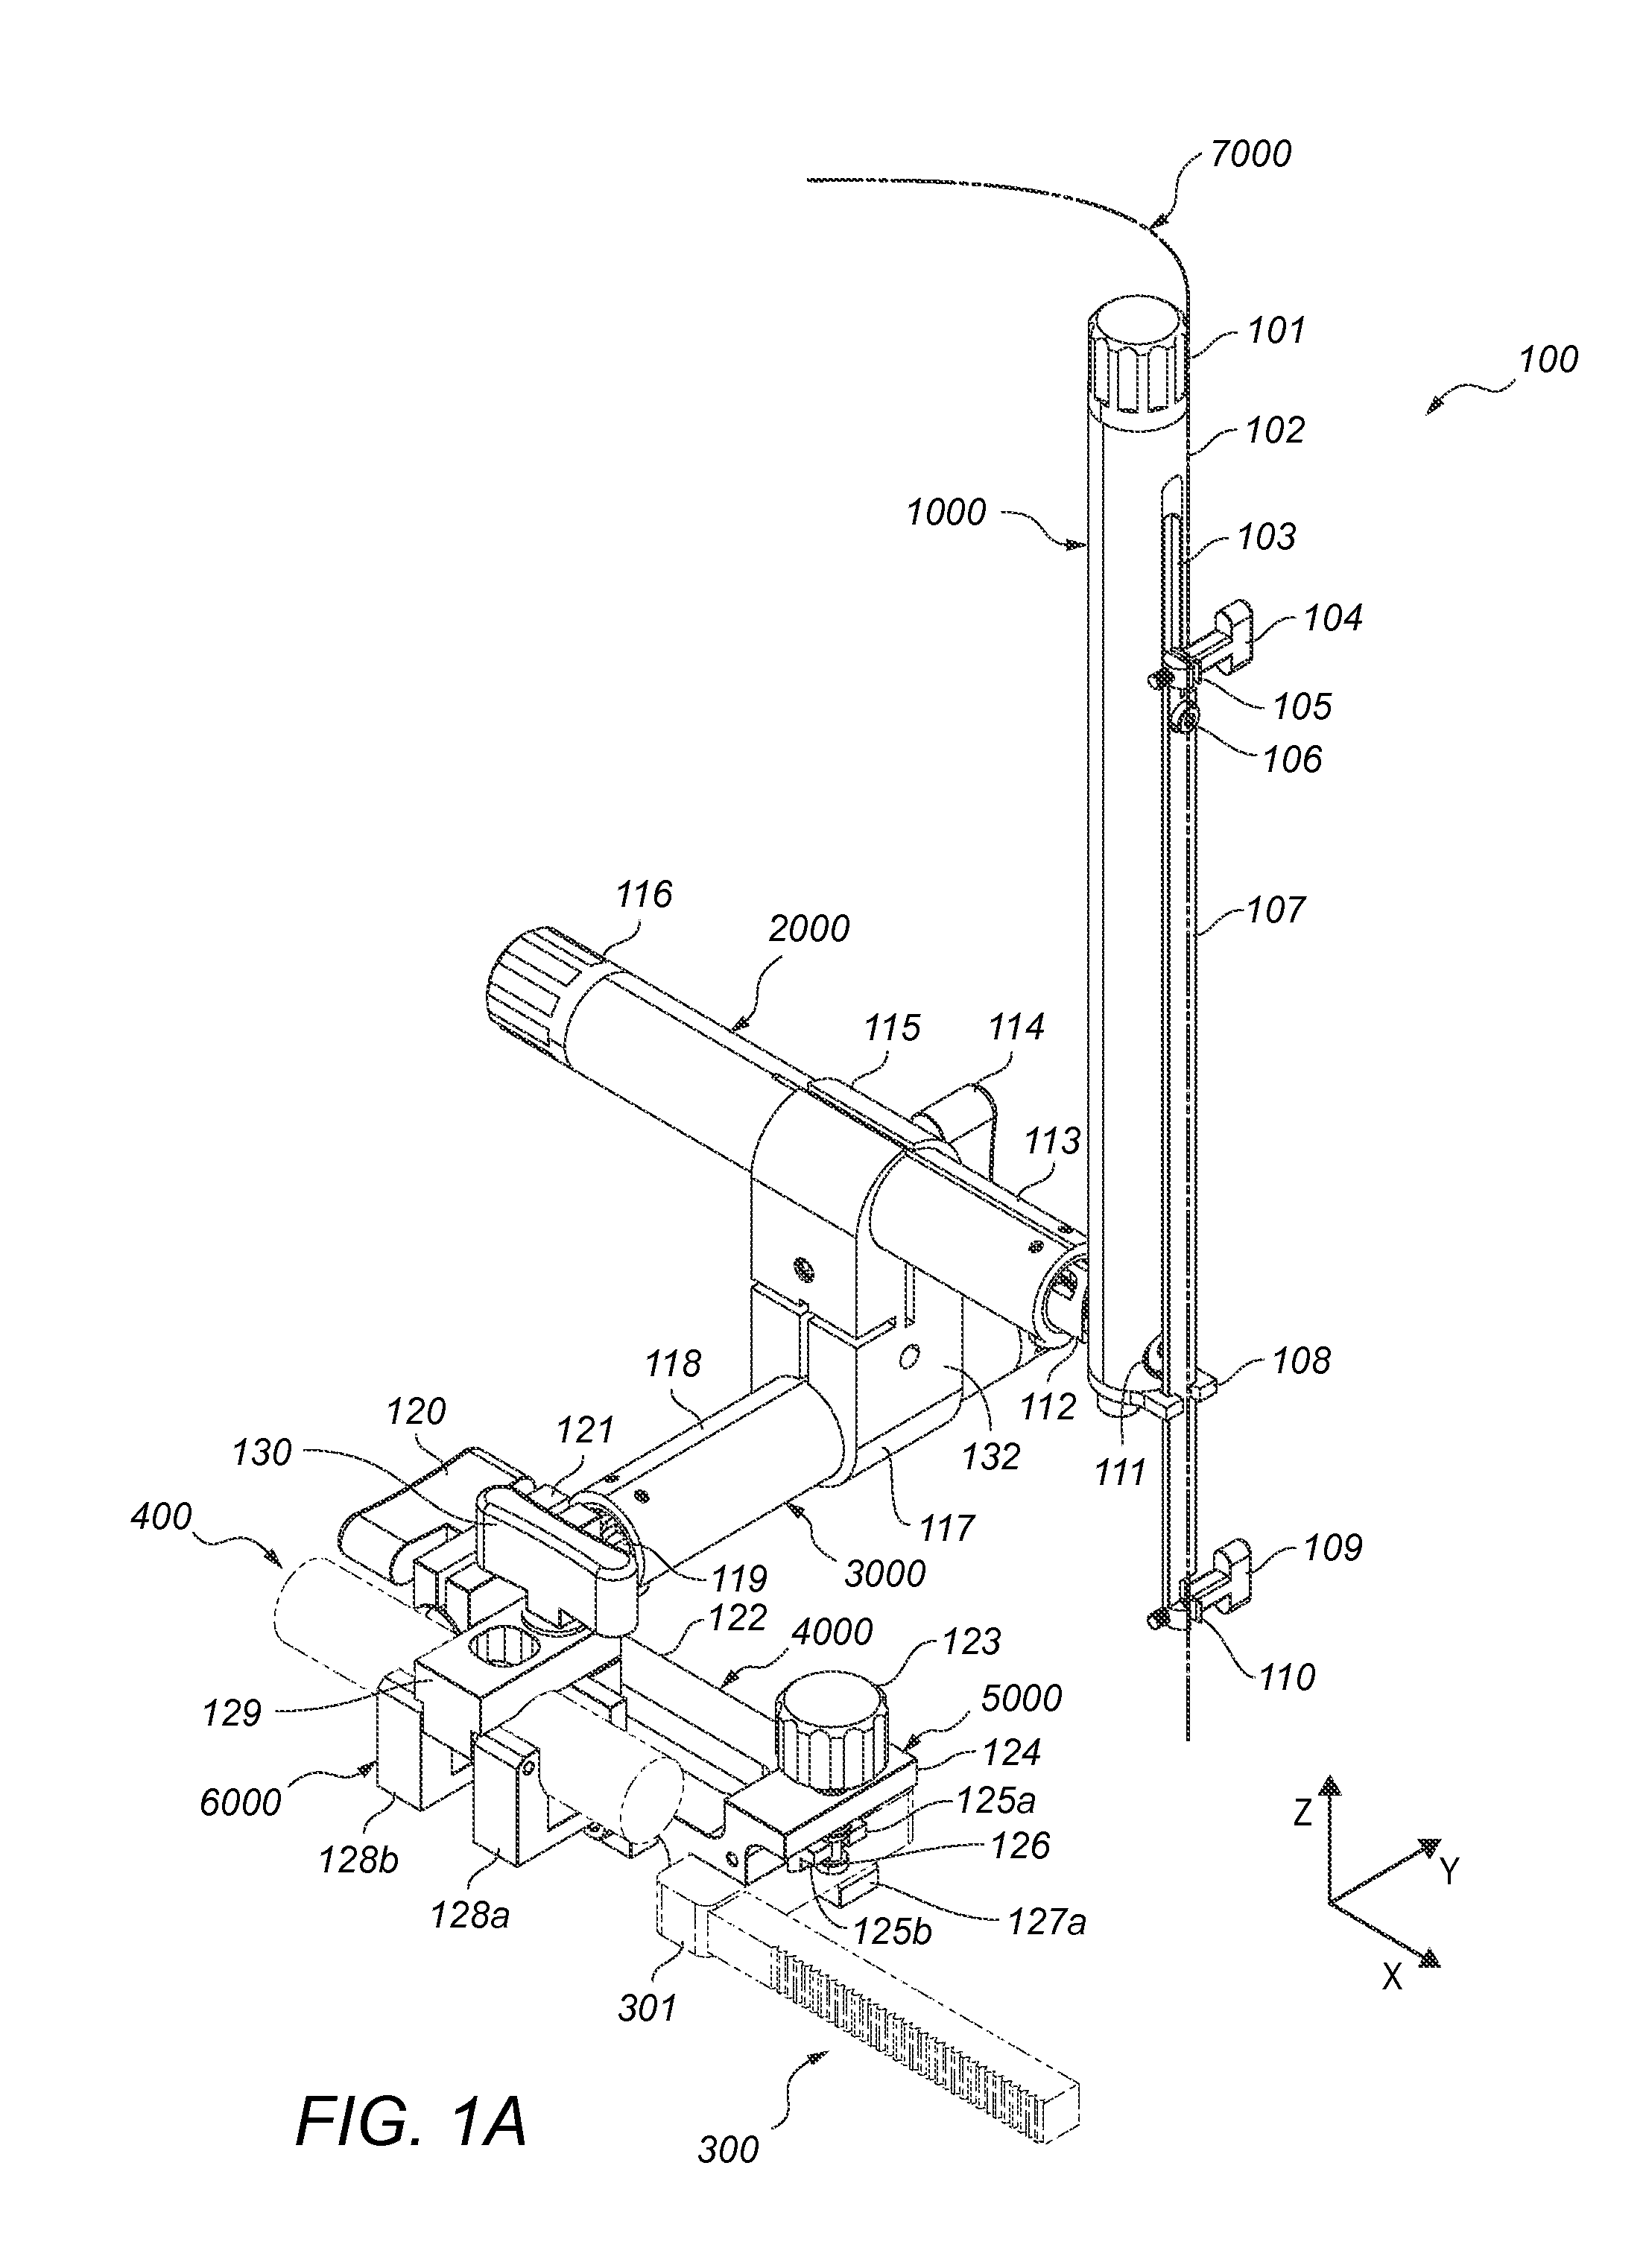 Stabilization apparatuses and methods for medical procedures